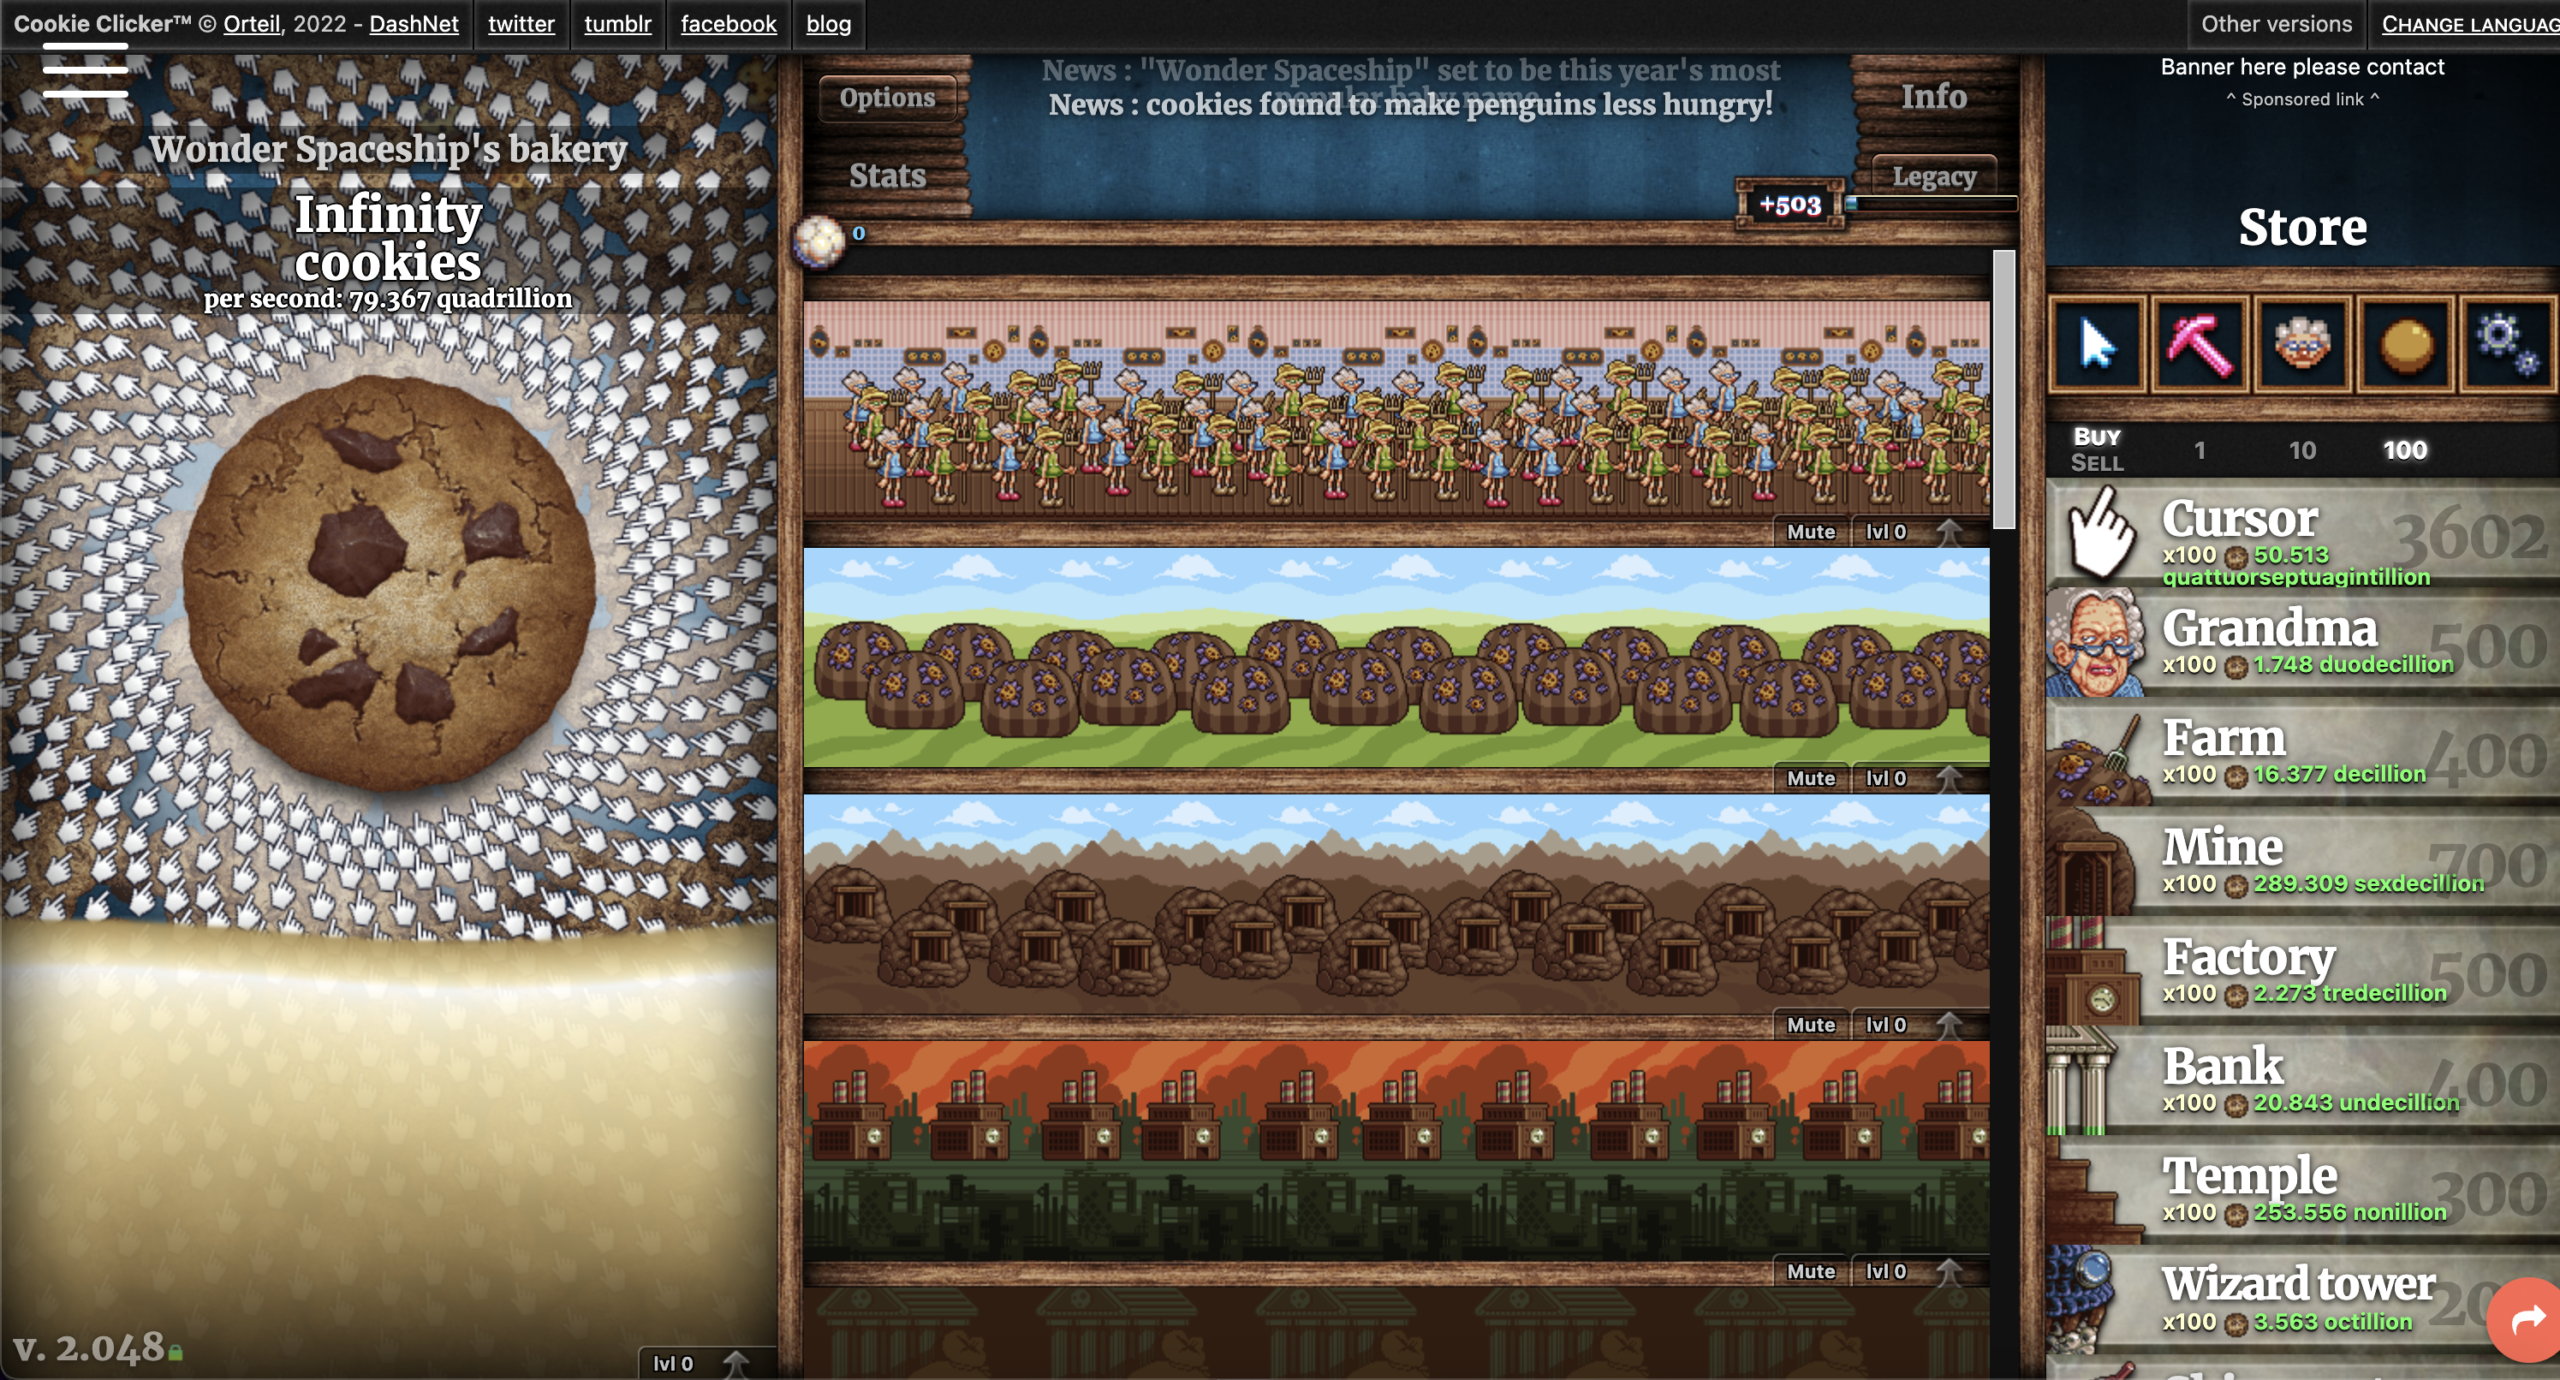 Cookie Clicker Game Online - Play Cookie Clicker Game Online On